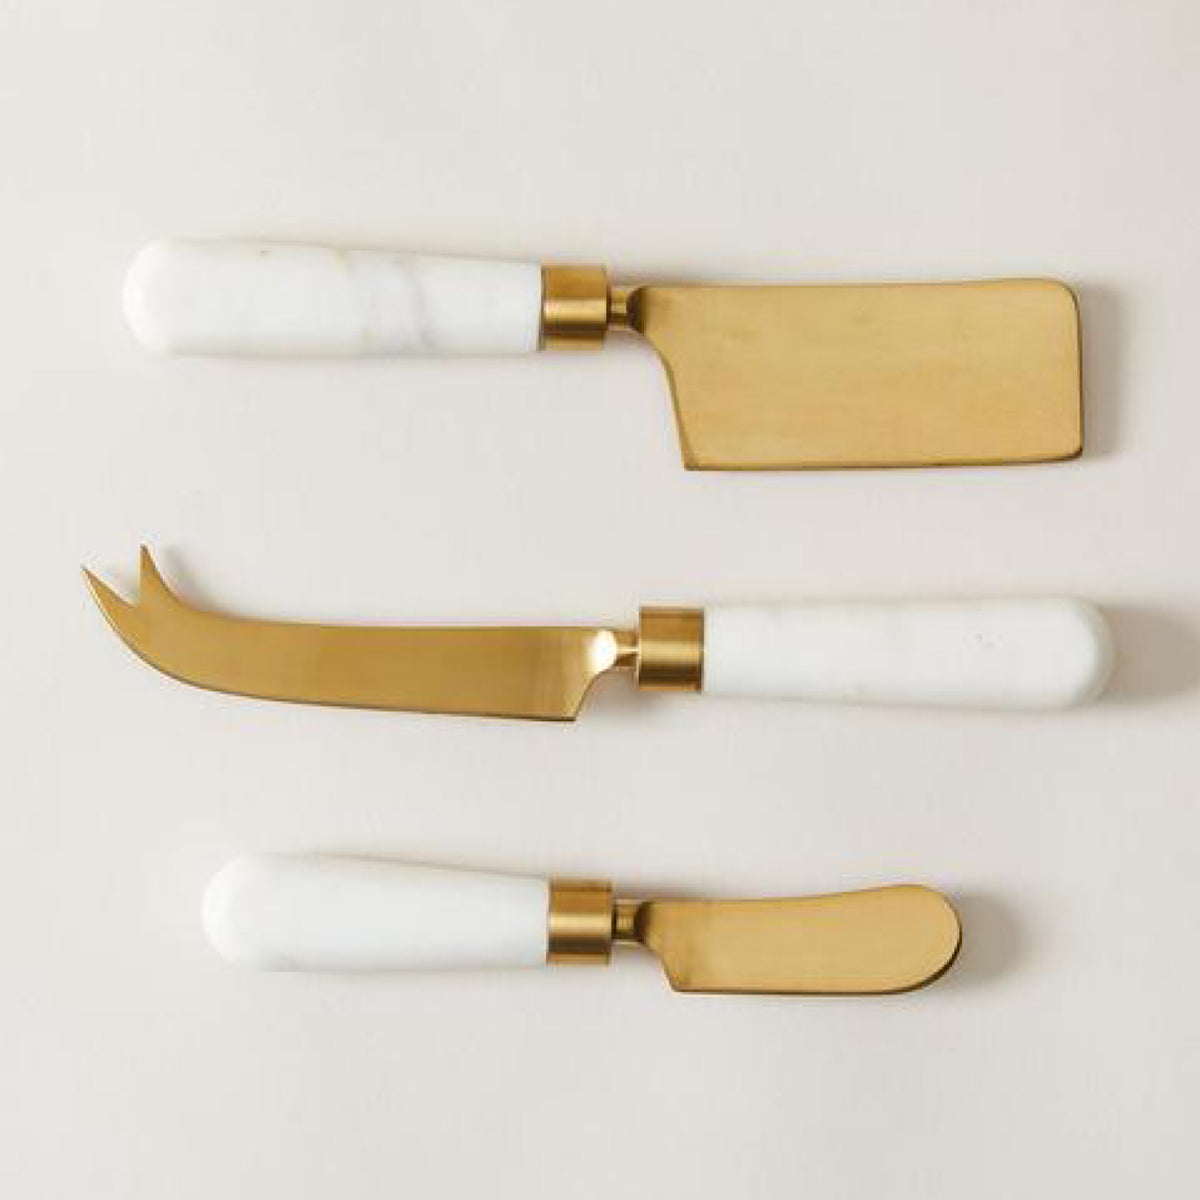 Weston Marble Cheese Knives